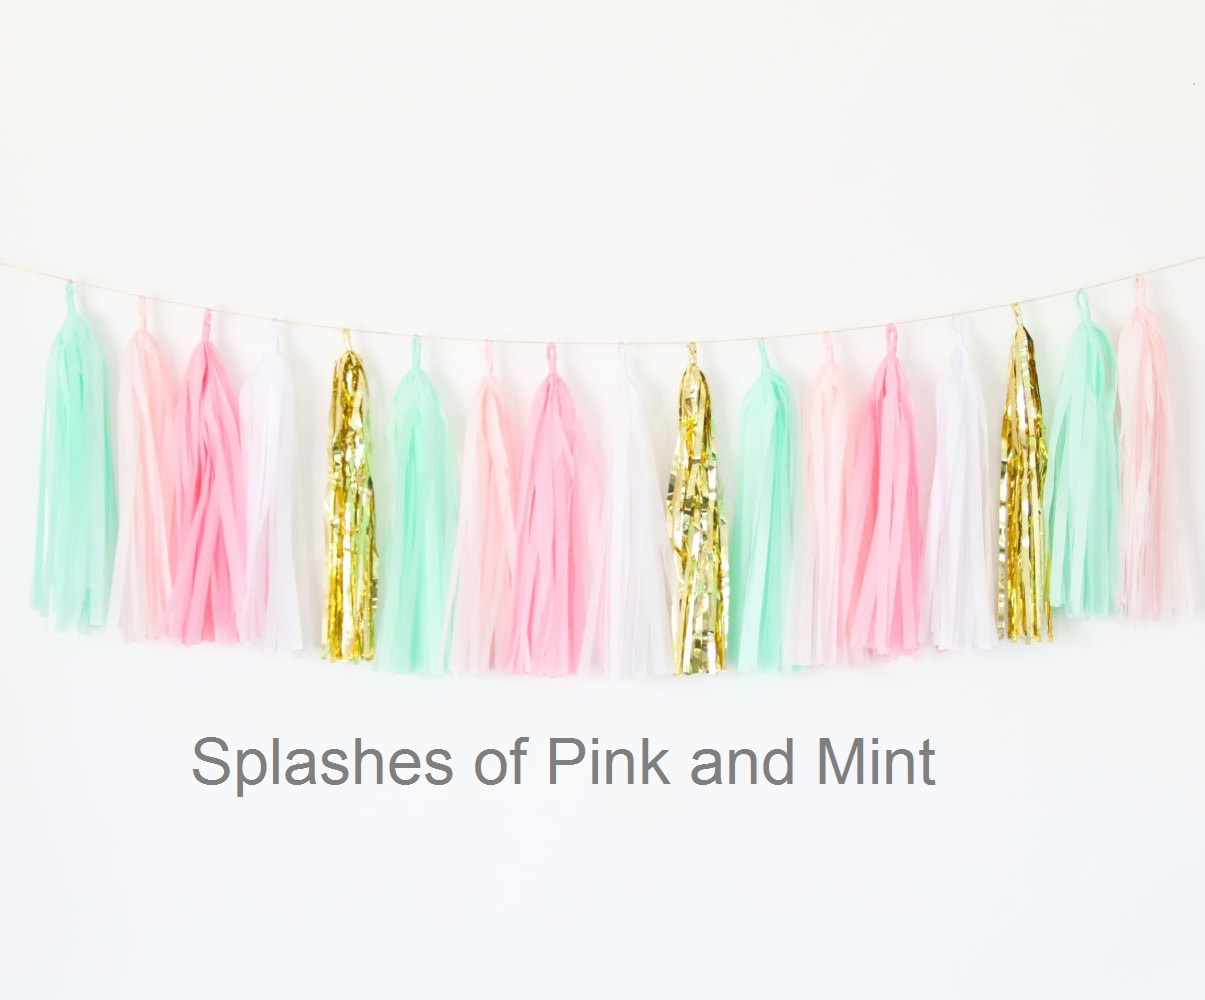 Splashes of Pink and Mint